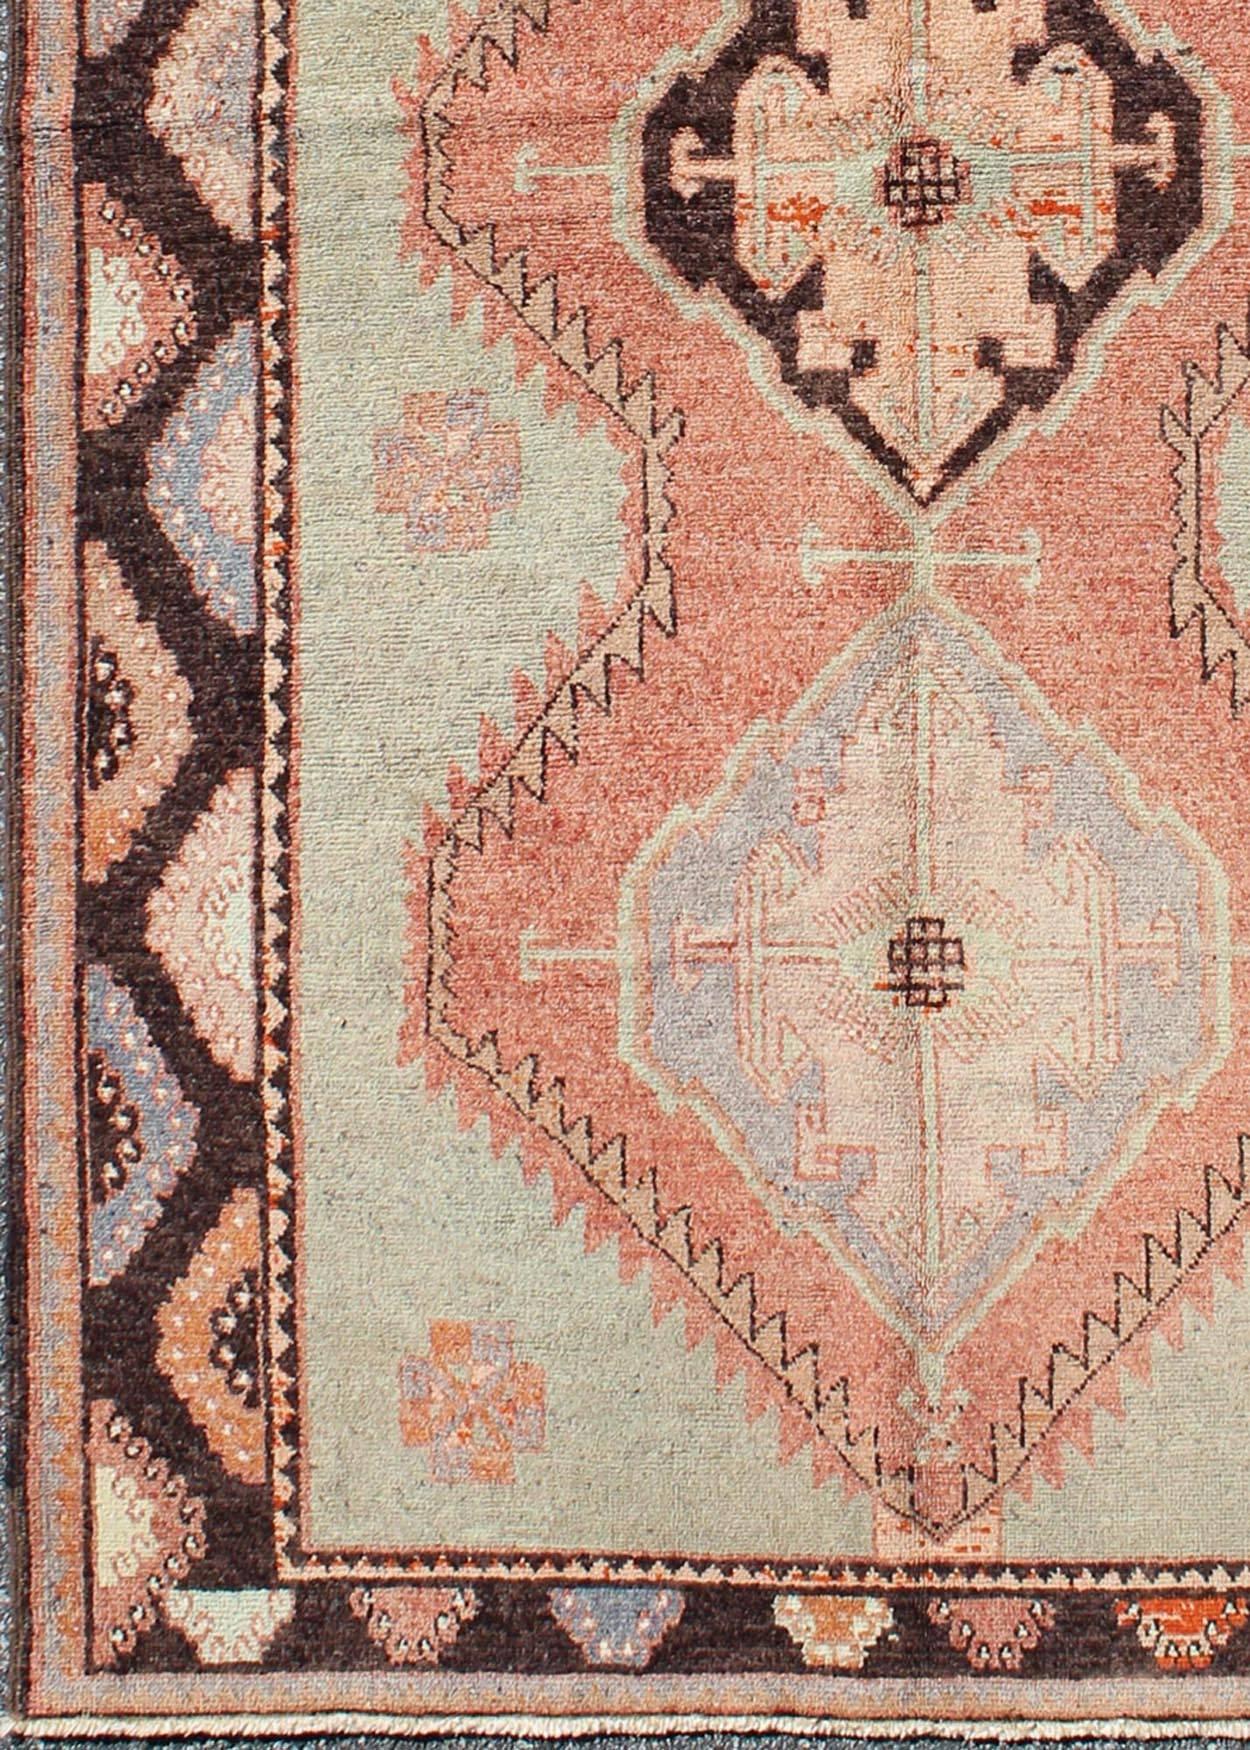 Turkish Oushak Rug with Geometric in Tangerine, Green and Brown.
This soft color Oushak carpet rests beautifully upon a field of elegant green and tangerine. Three medallions take center stage and are well balanced with a border of cast green,